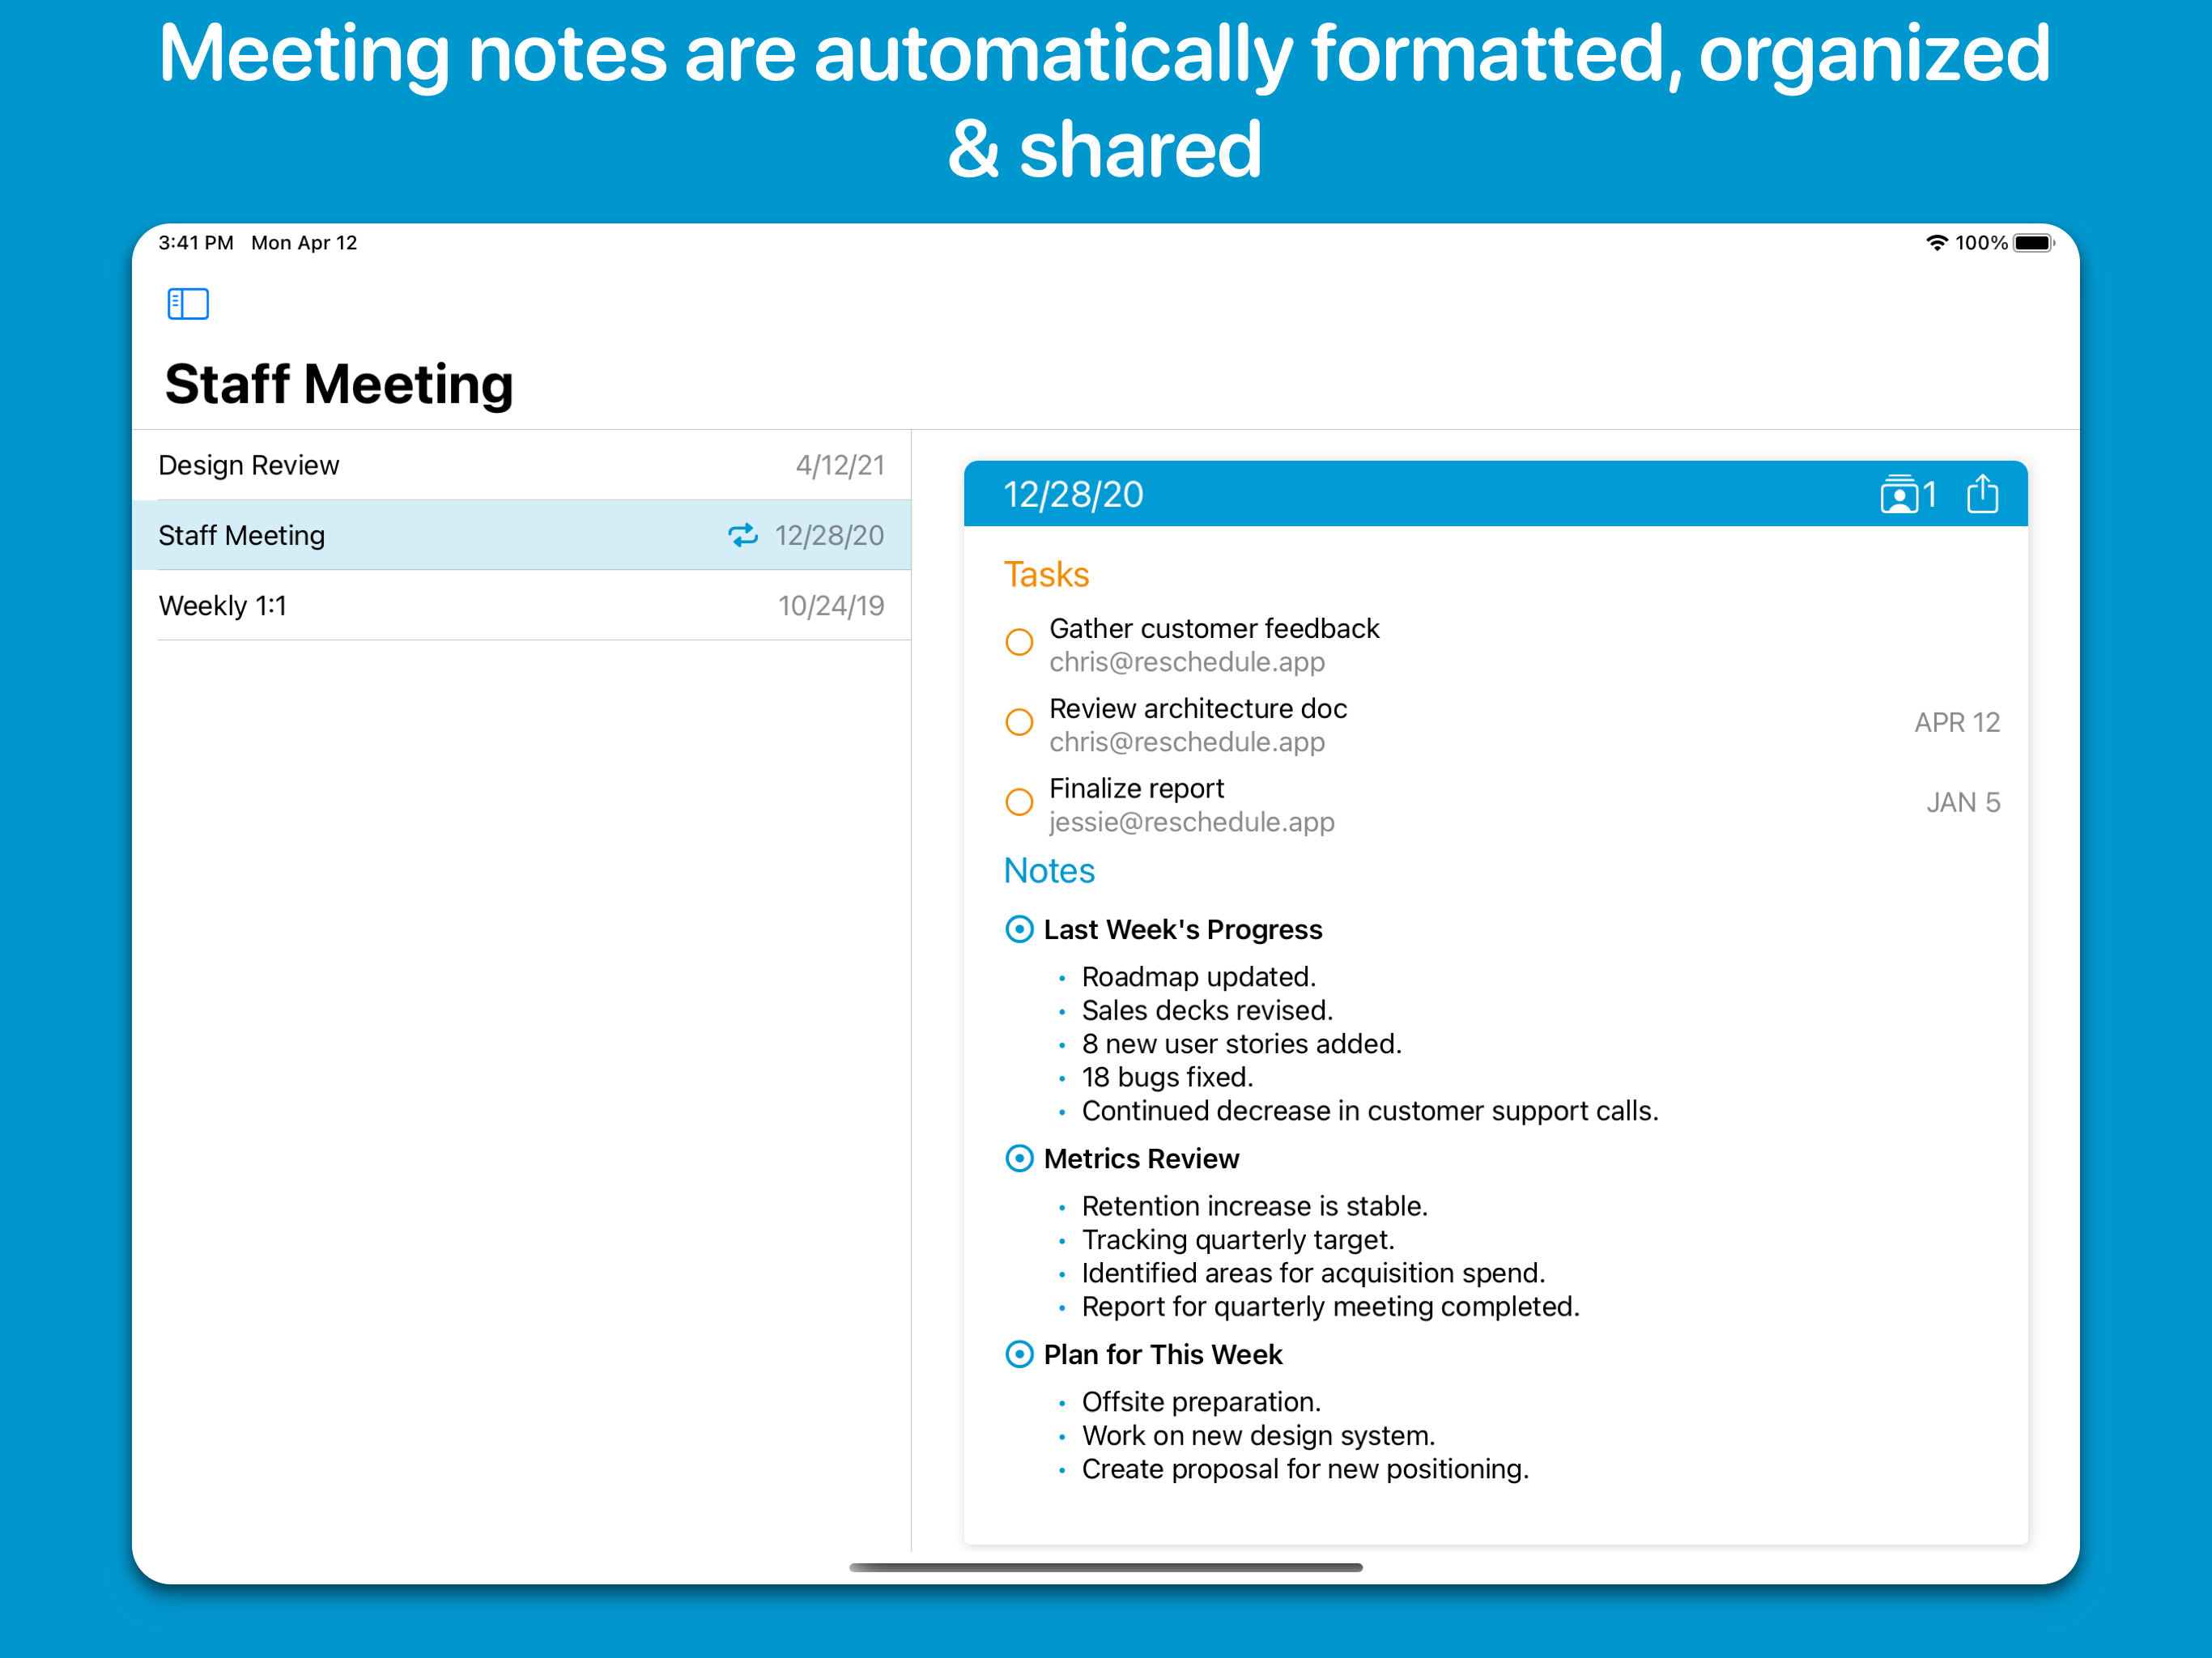 Meeting notes organized and shared automatically